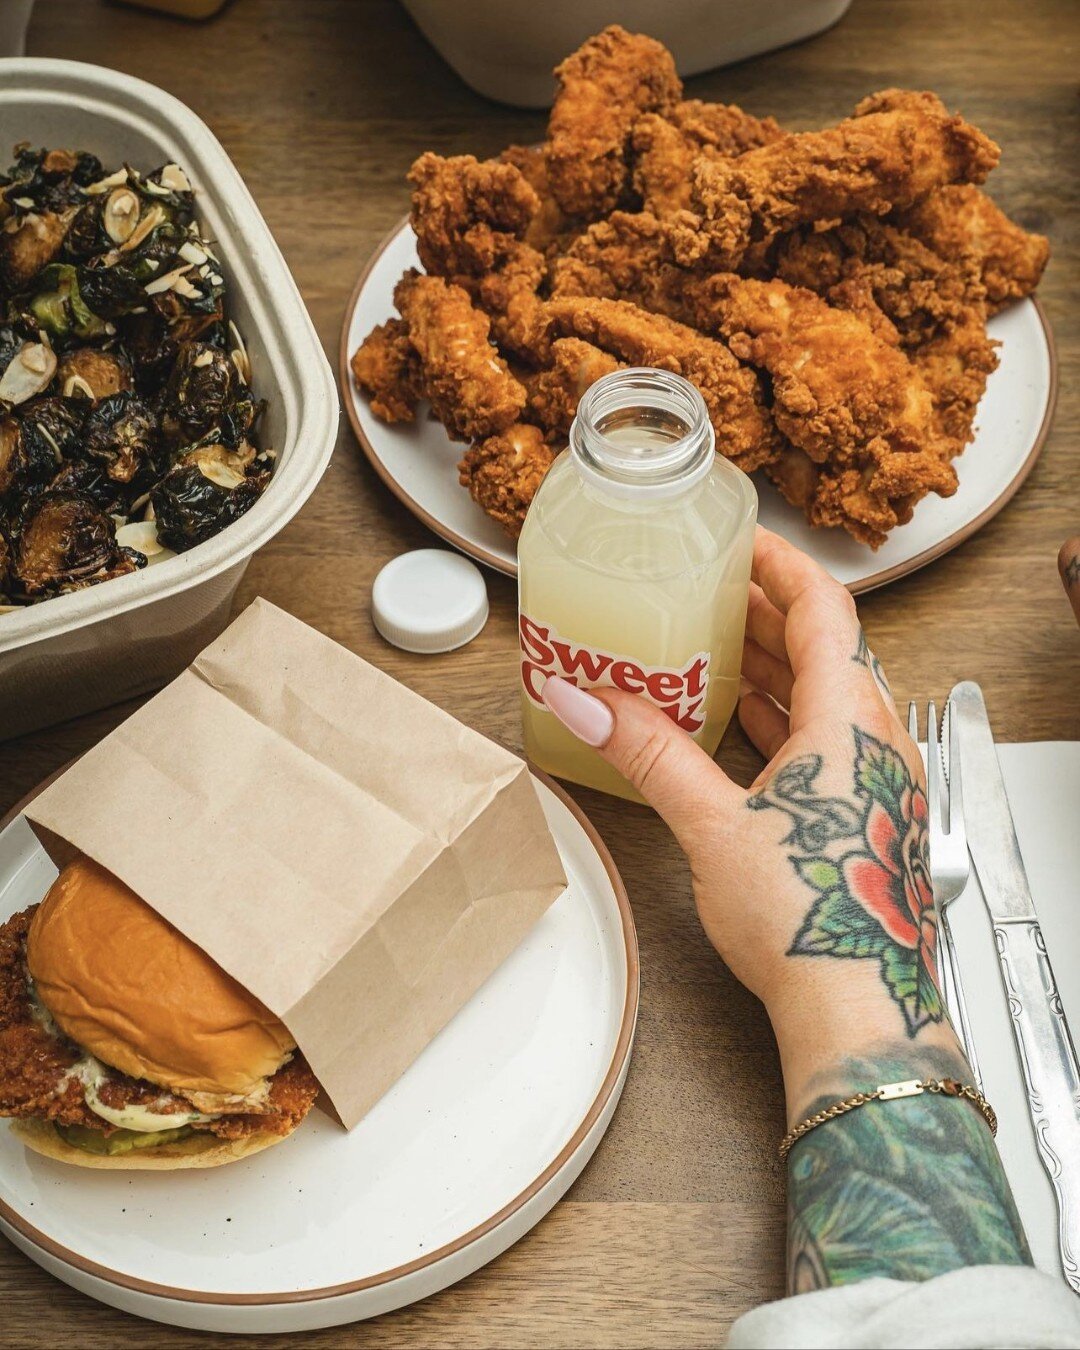 Happy National Fried Chicken Day from #UnionSquare! Check out these spots for fried chicken that will make you fall in love at first crunch✨

🐔Sweet Chick, 32 East 16th Street
🐔Bobwhite Counter @ Urbanspace, 124 East 14th Street
🐔Sticky's Finger J